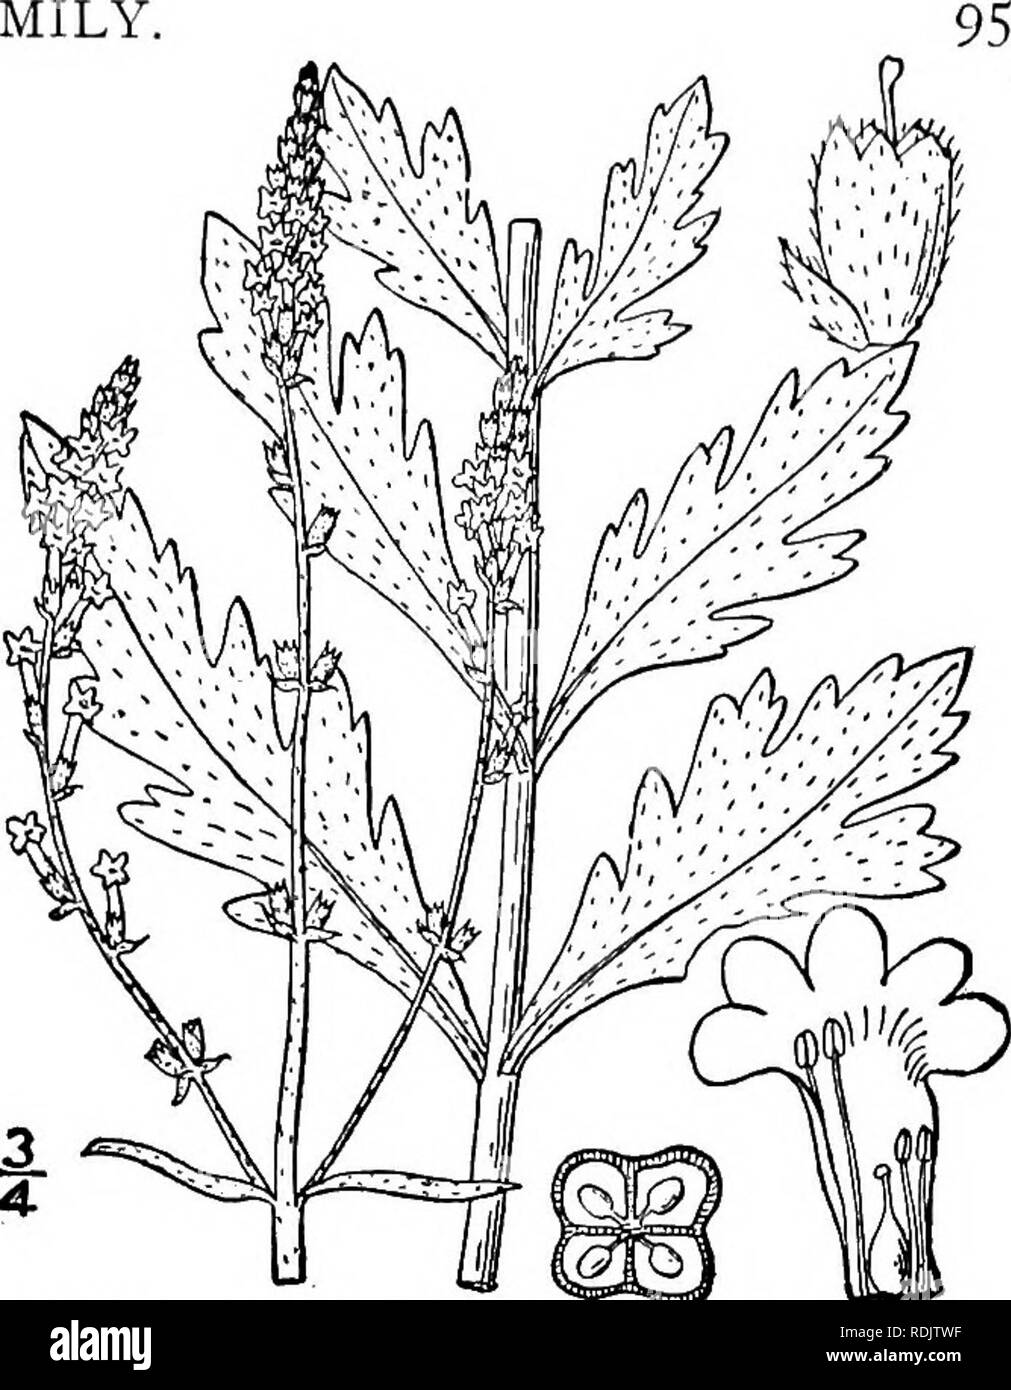 . An illustrated flora of the northern United States, Canada and the British possessions, from Newfoundland to the parallel of the southern boundary of Virginia, and from the Atlantic Ocean westward to the 102d meridian. Botany; Botany. Genus i. VERVAIN FAMILY, I. Verbena officinalis L. European Ver- vain. Herb-of-the-Cross. Berbine. Fig- 3552- Verbena officinalis L. Sp. PI. 20. 1753. Annual; stem 4-sided, slender, glabrous or nearly so, ascending or spreading, diffusely branched, 1 &quot;-3° high. Leaves minutely pubescent, the lower deeply incised or 1-2 pinnatifid, ovate, oblong, or obovate Stock Photo